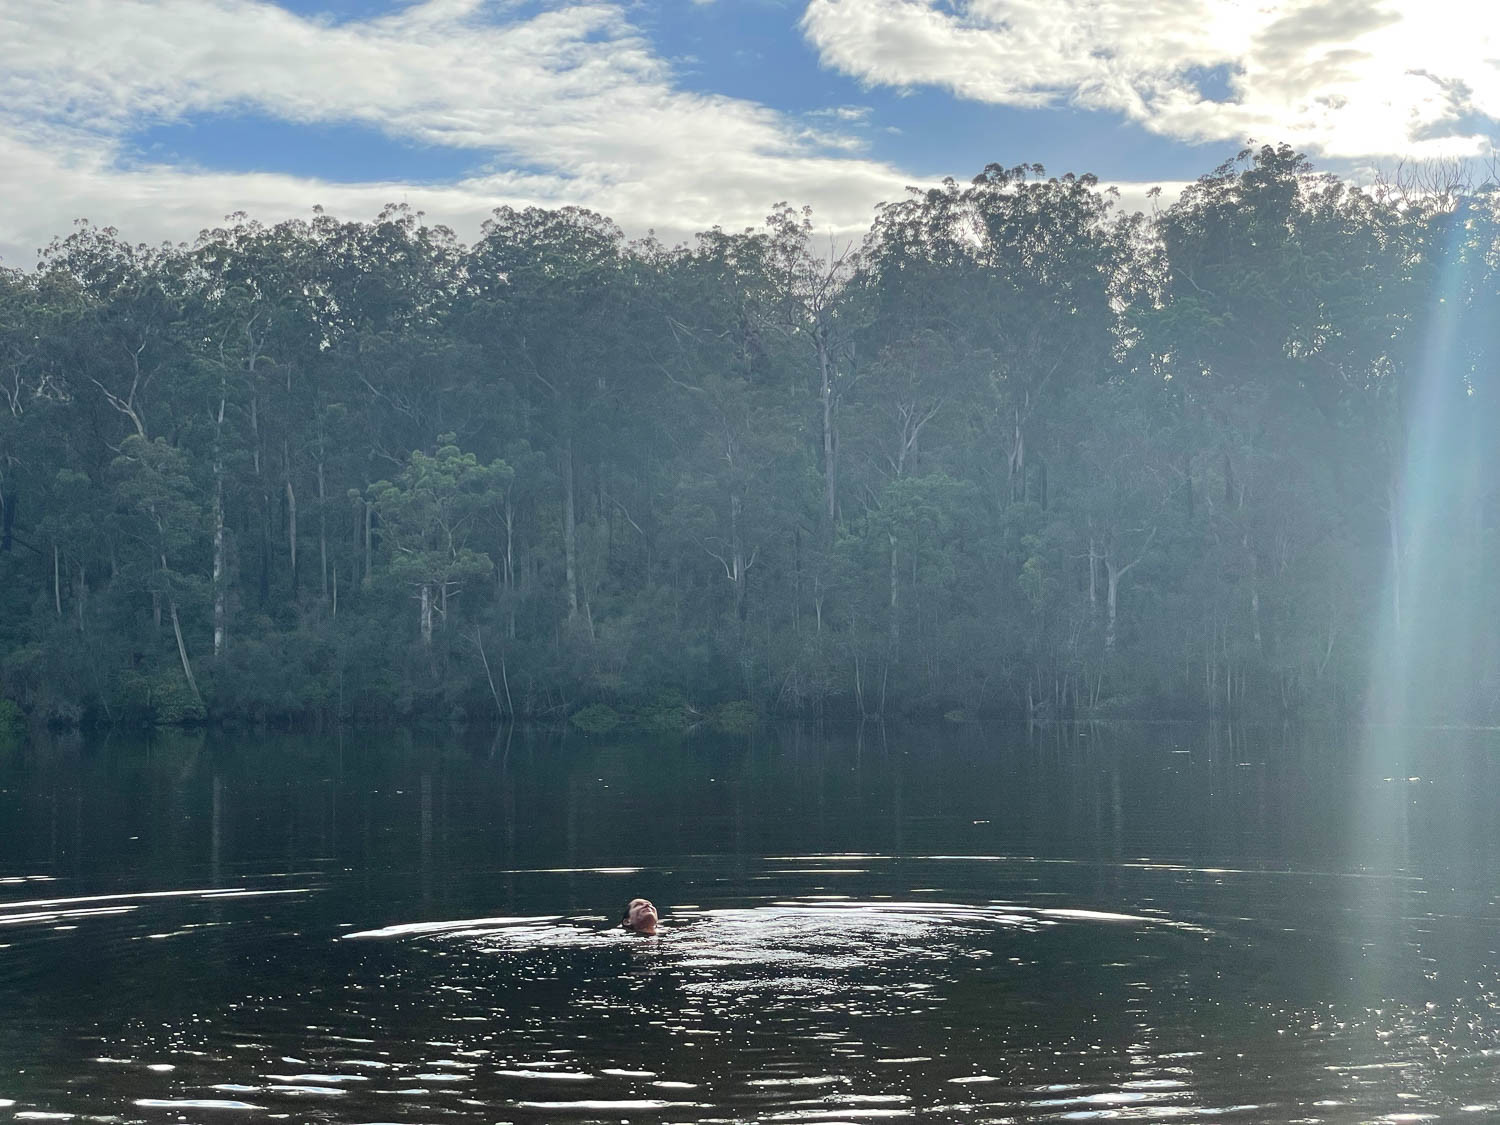 Swimming in Clyde River, Batemans Bay - Region X 3 Day Clyde River Expedition